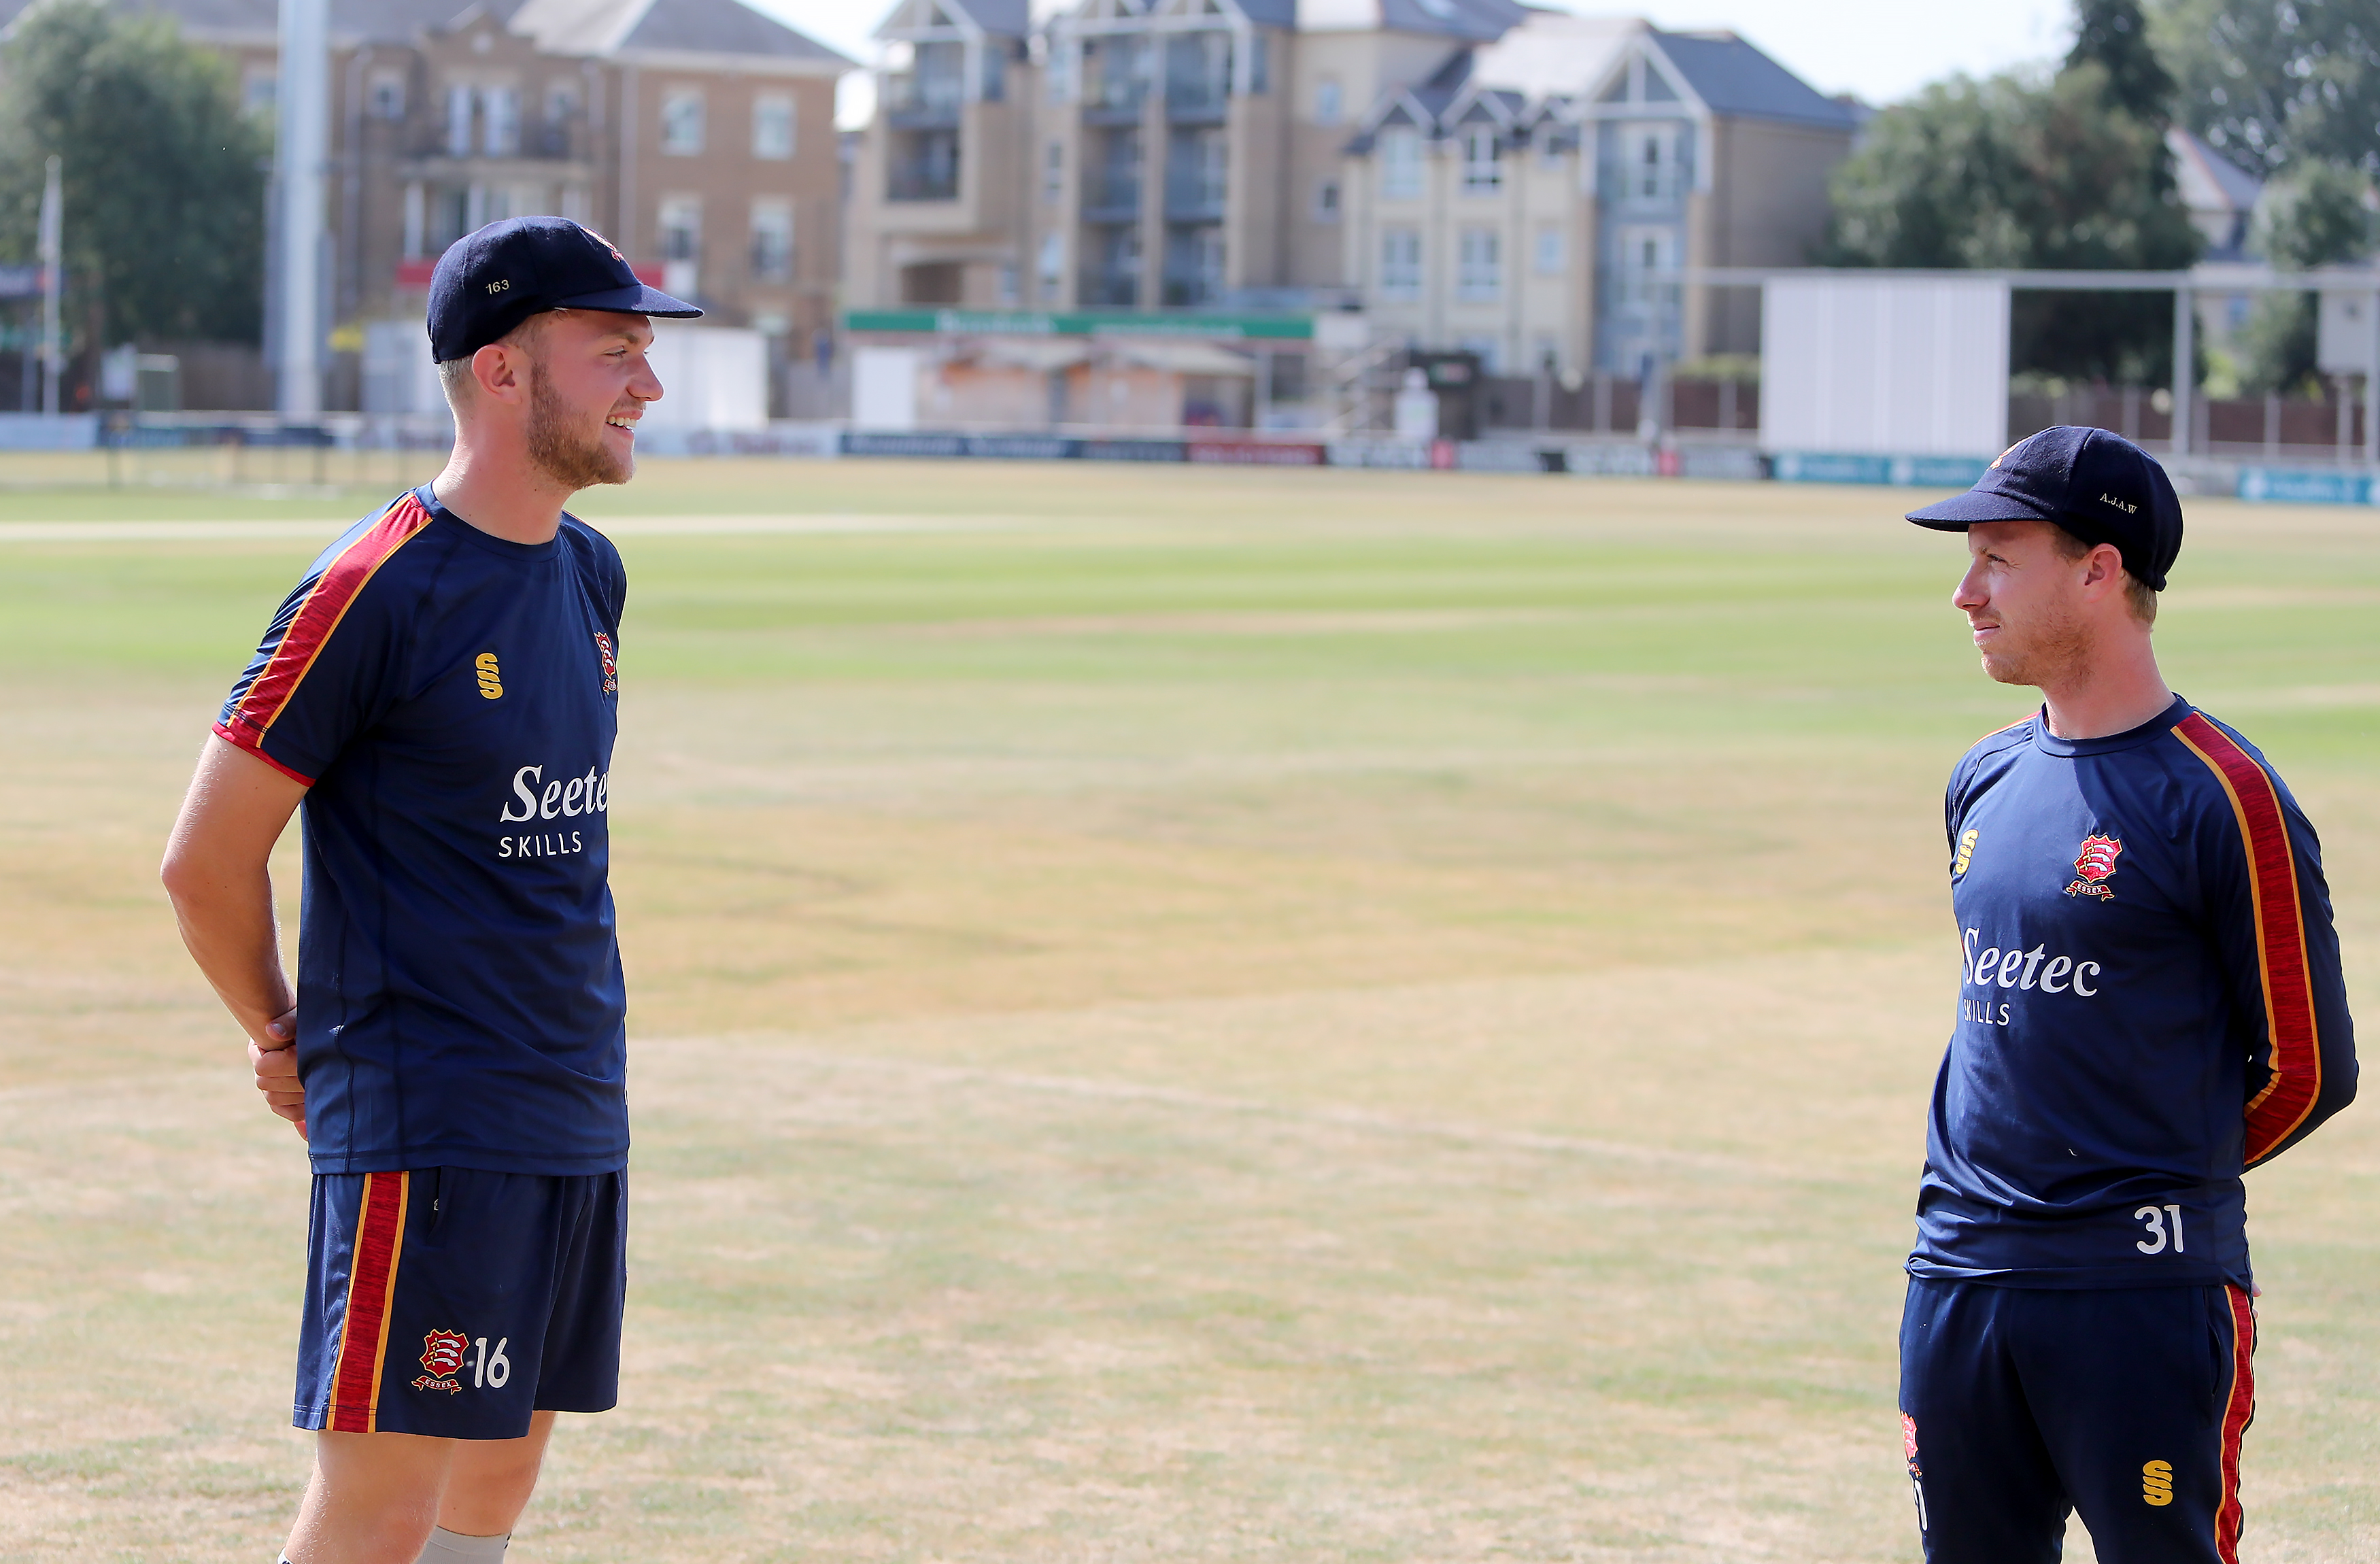 Sam Cook & Adam Wheater are awarded their County Caps during Day Three of the Bob Willis Trophy match between Essex and Kent at Cloudfm County Ground on August 10.